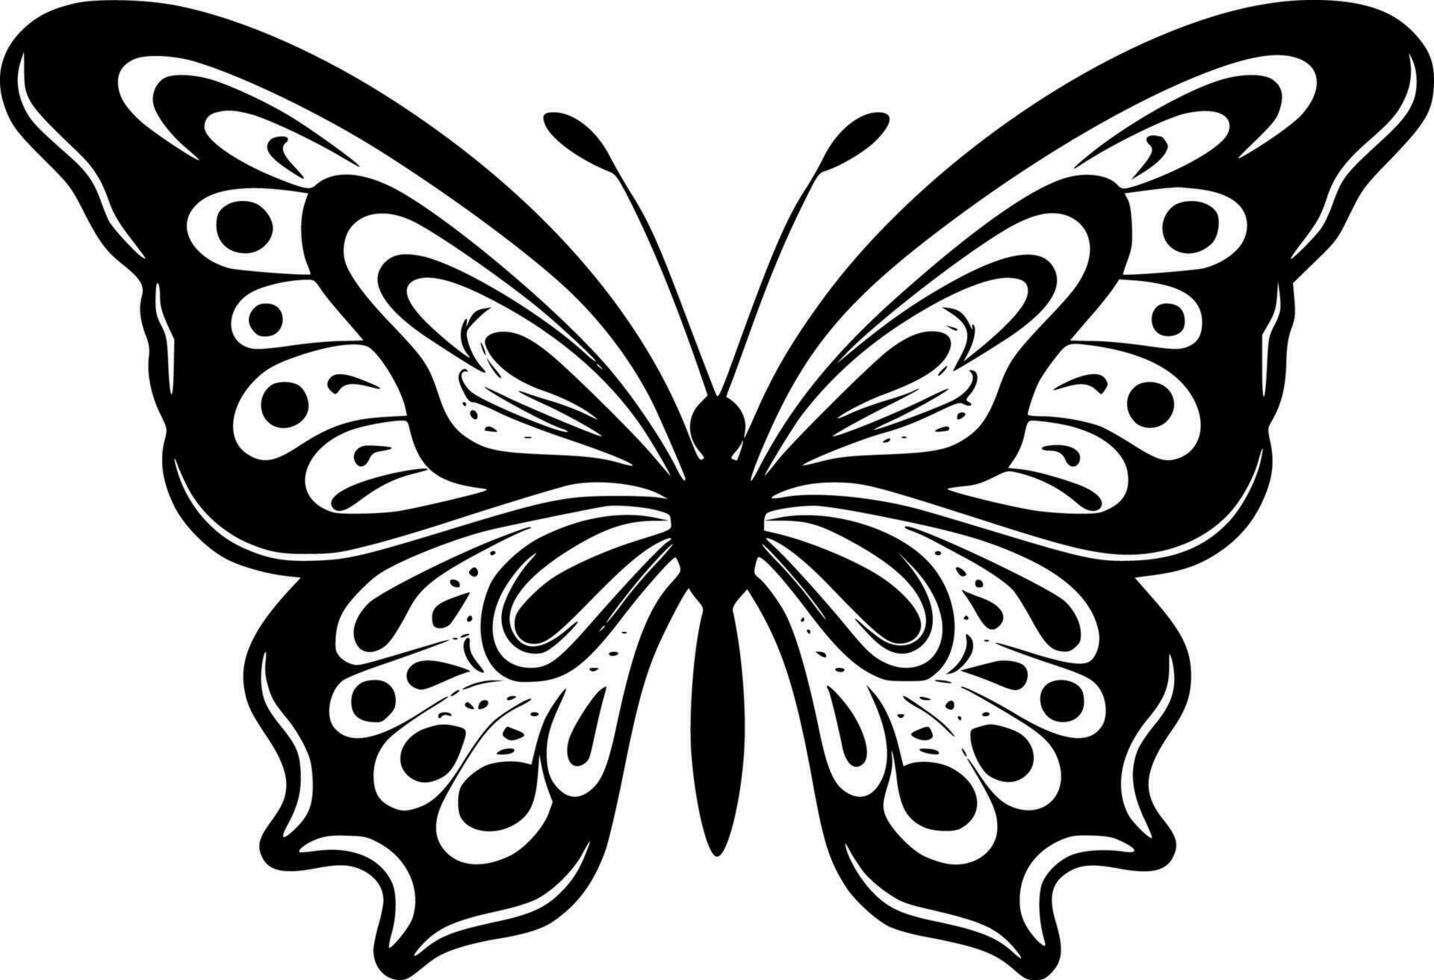 Butterflies, Minimalist and Simple Silhouette - Vector illustration